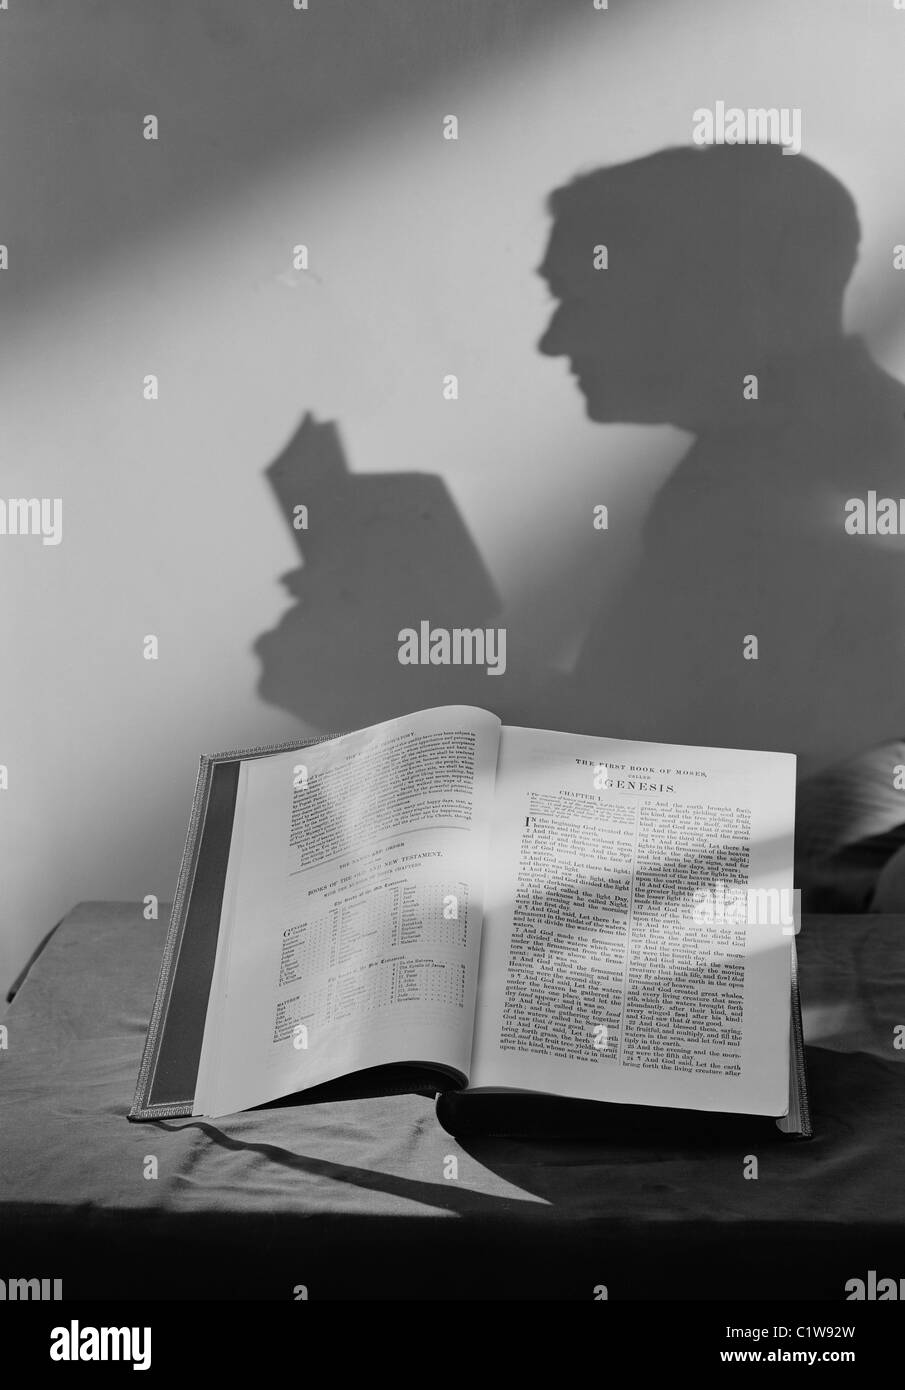 Shadow of man reading open bible Stock Photo